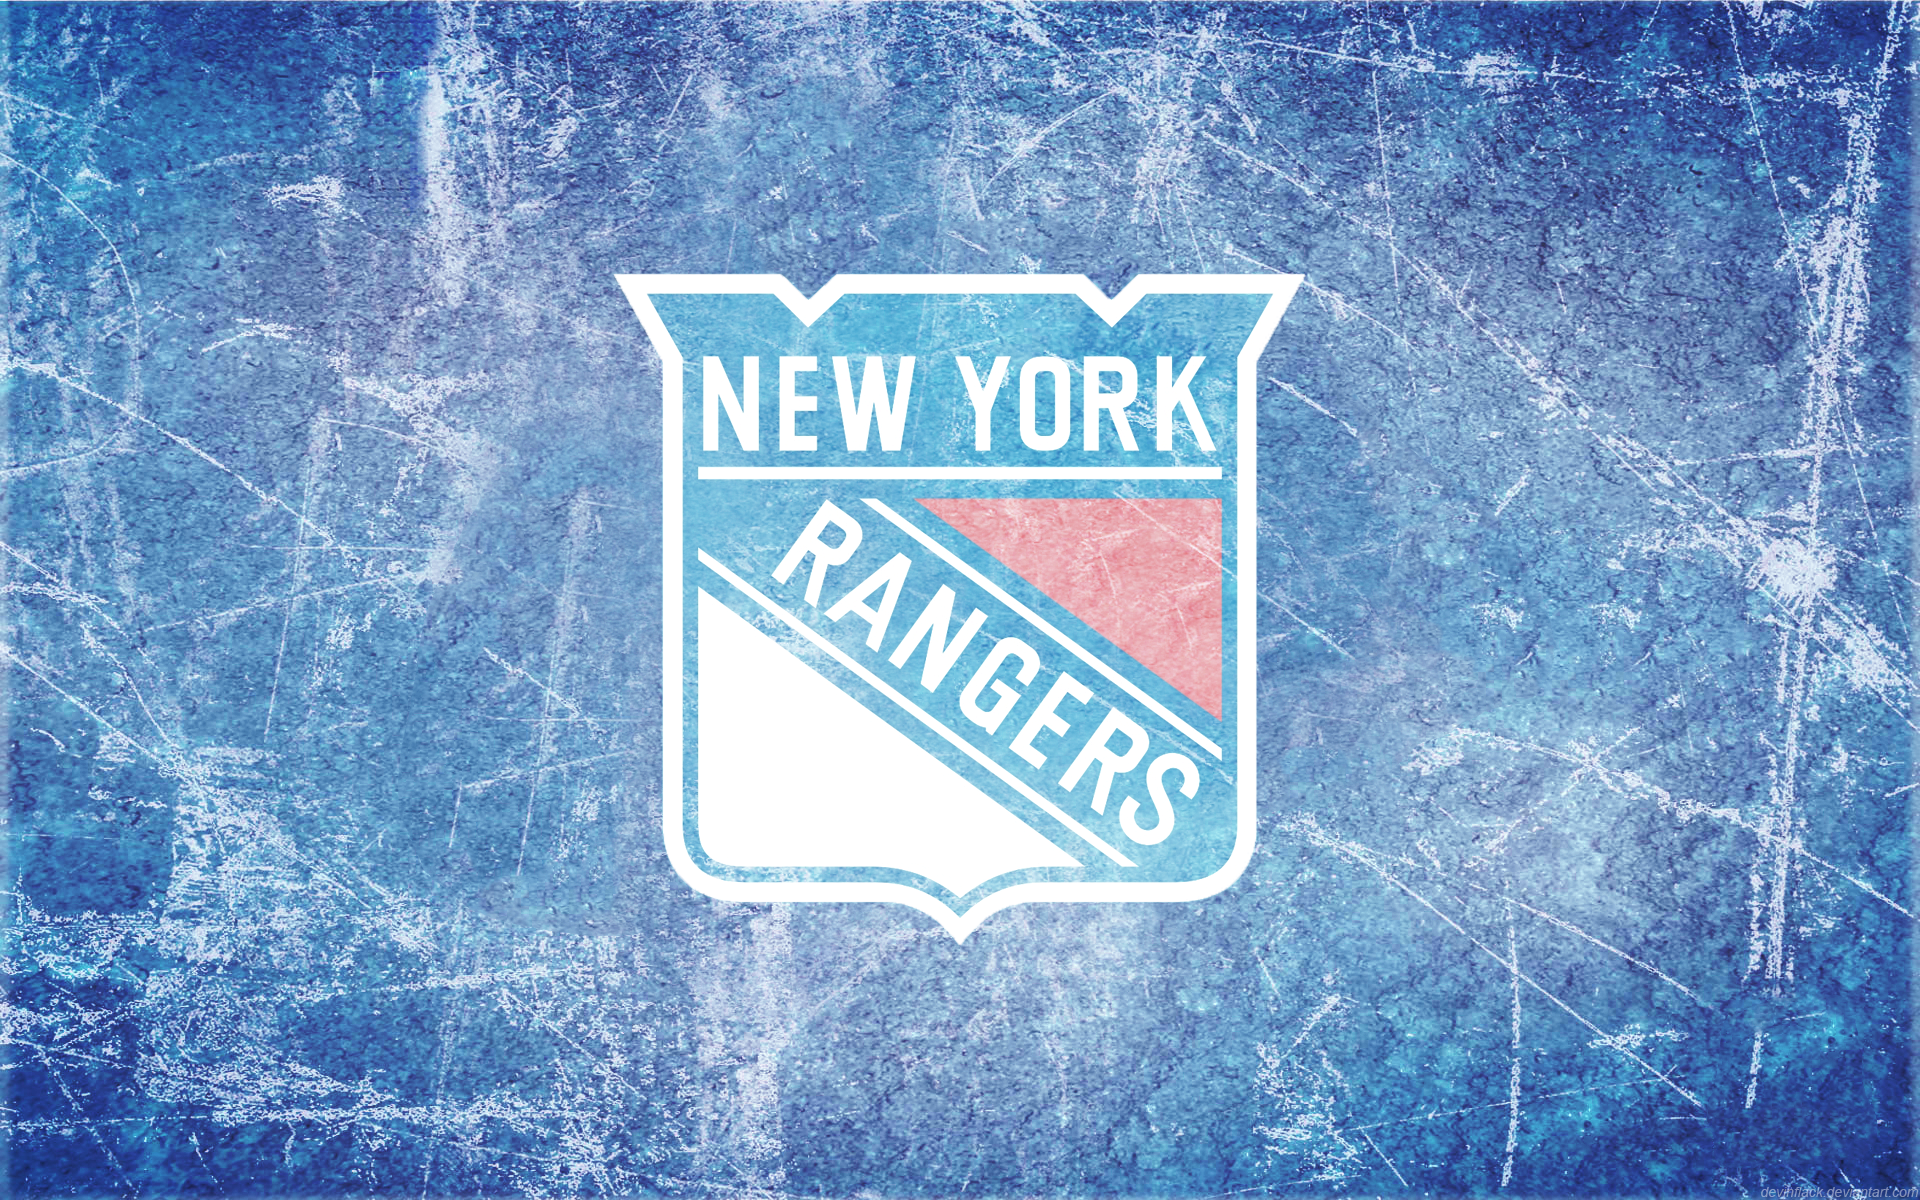 Background of the day New York Rangers New York Rangers wallpapers 1920x1200